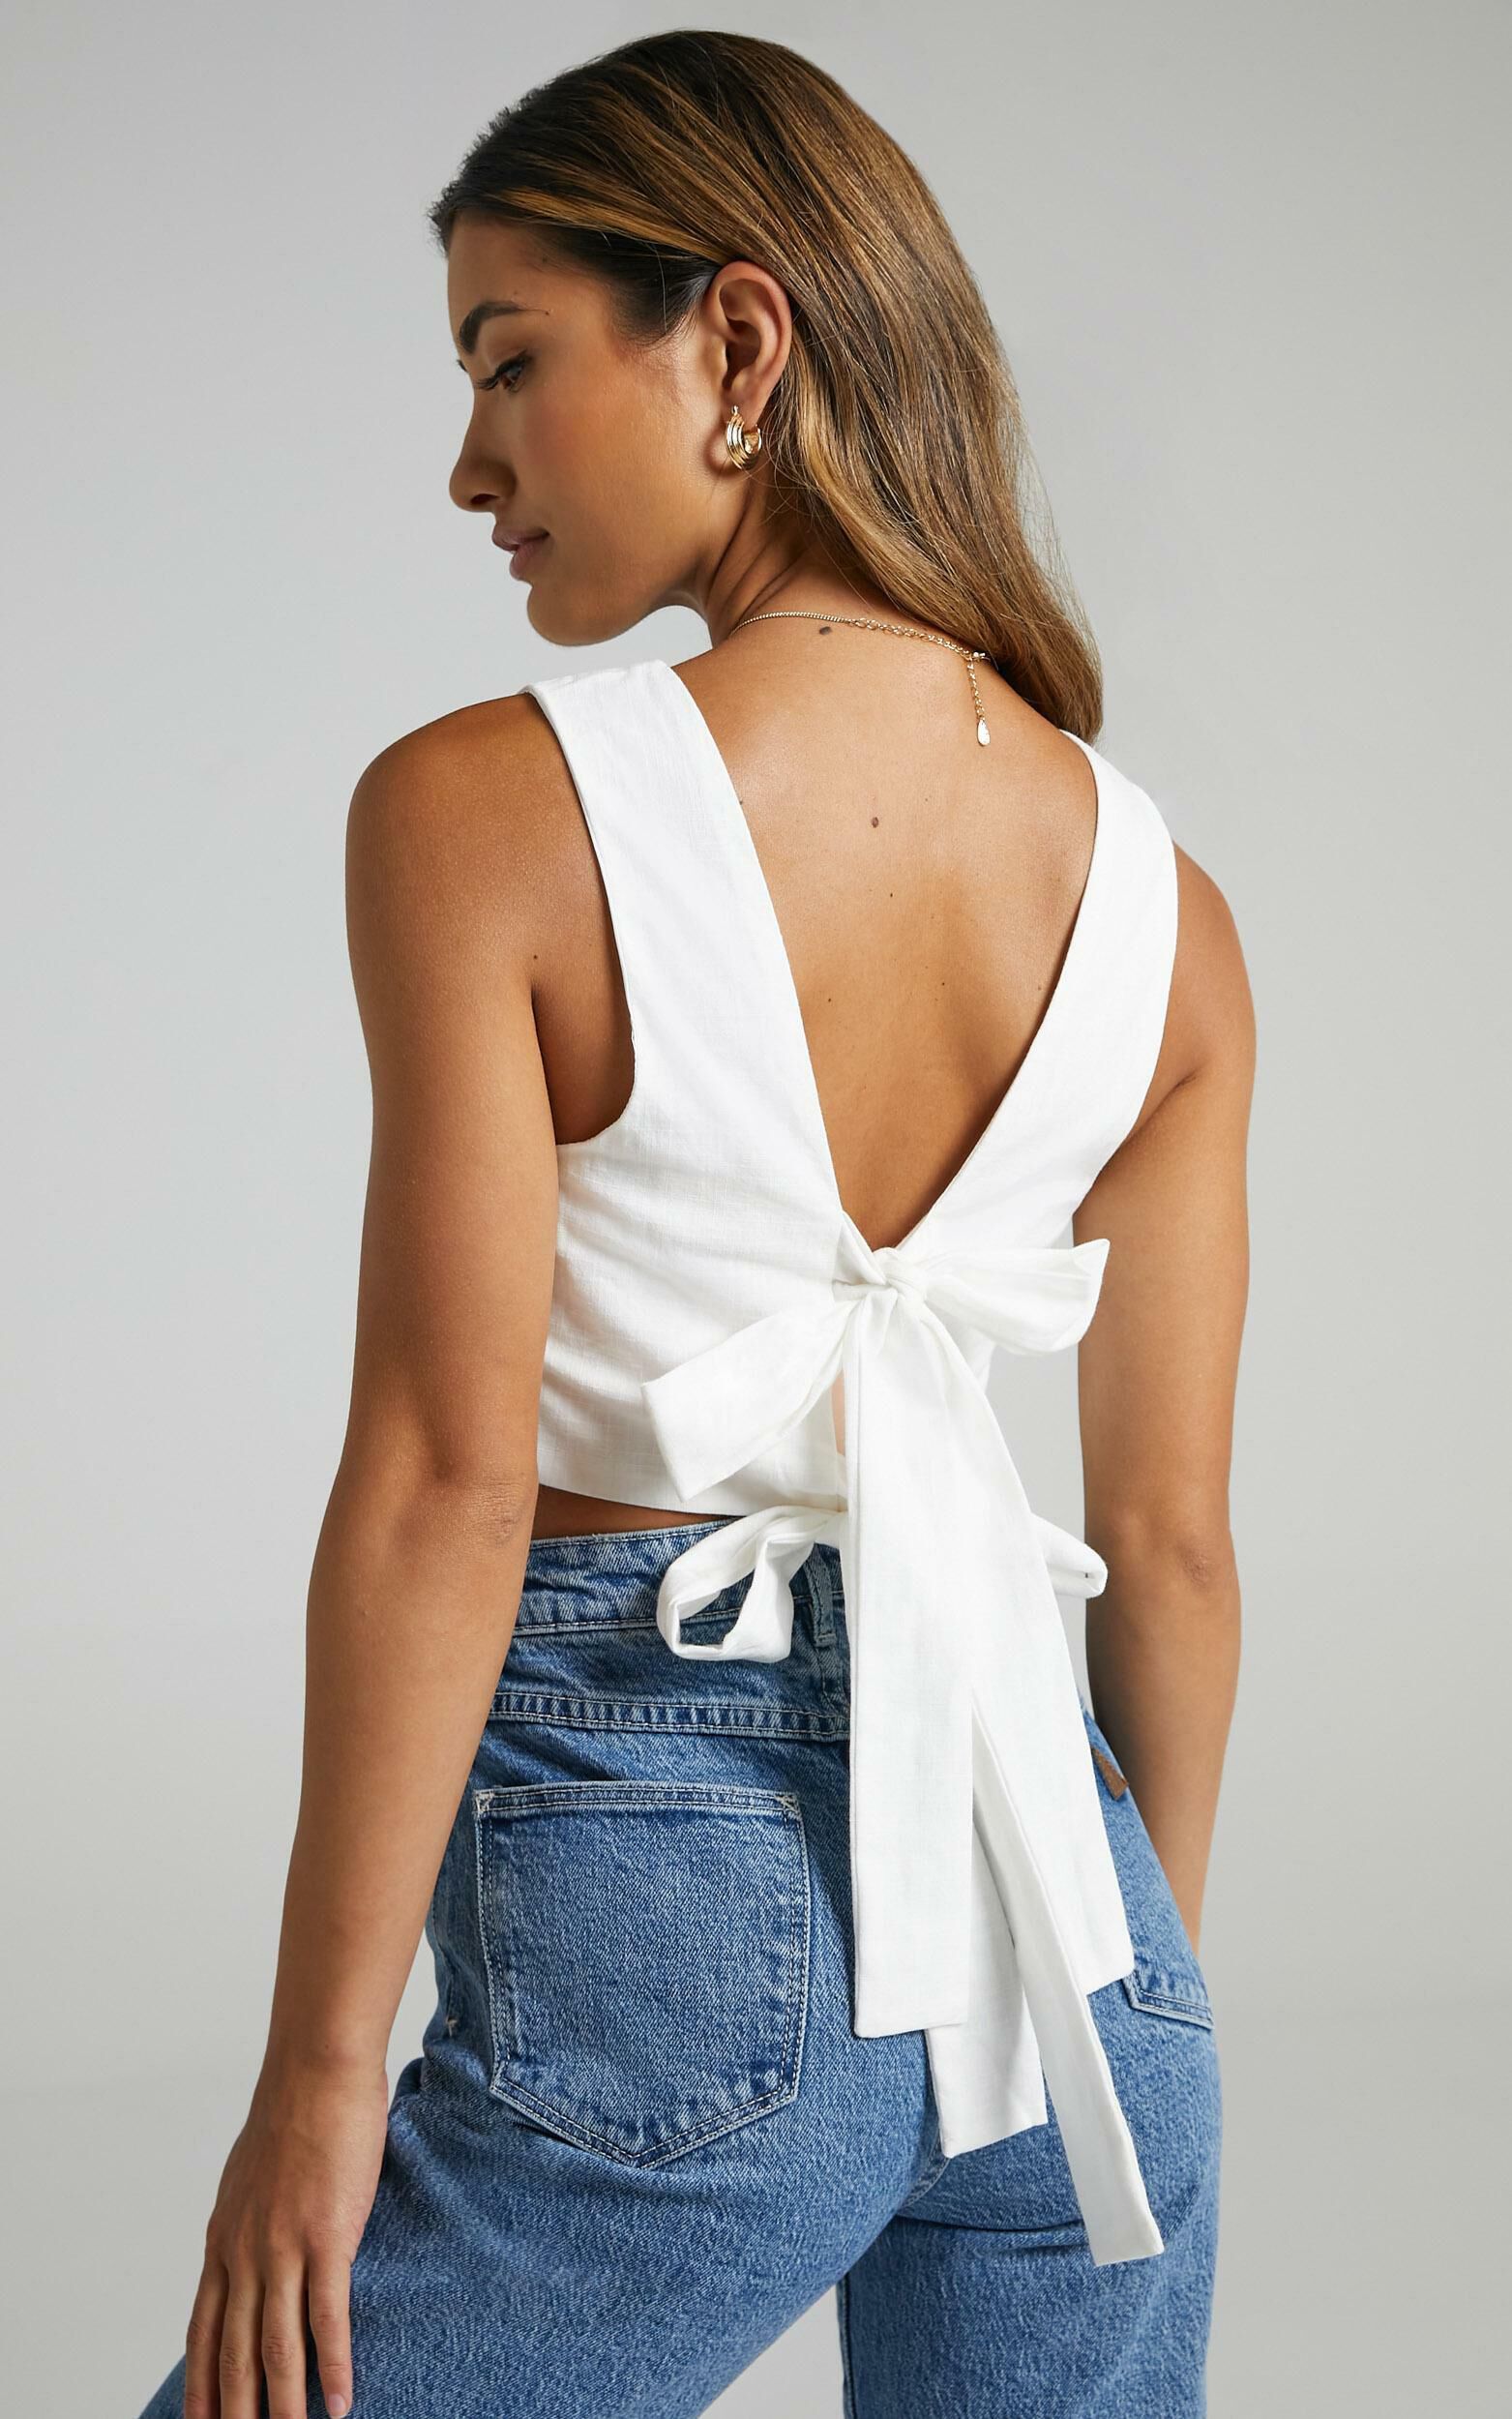 Loxley Top - Tie Up Top in White | Showpo (US, UK & Europe)